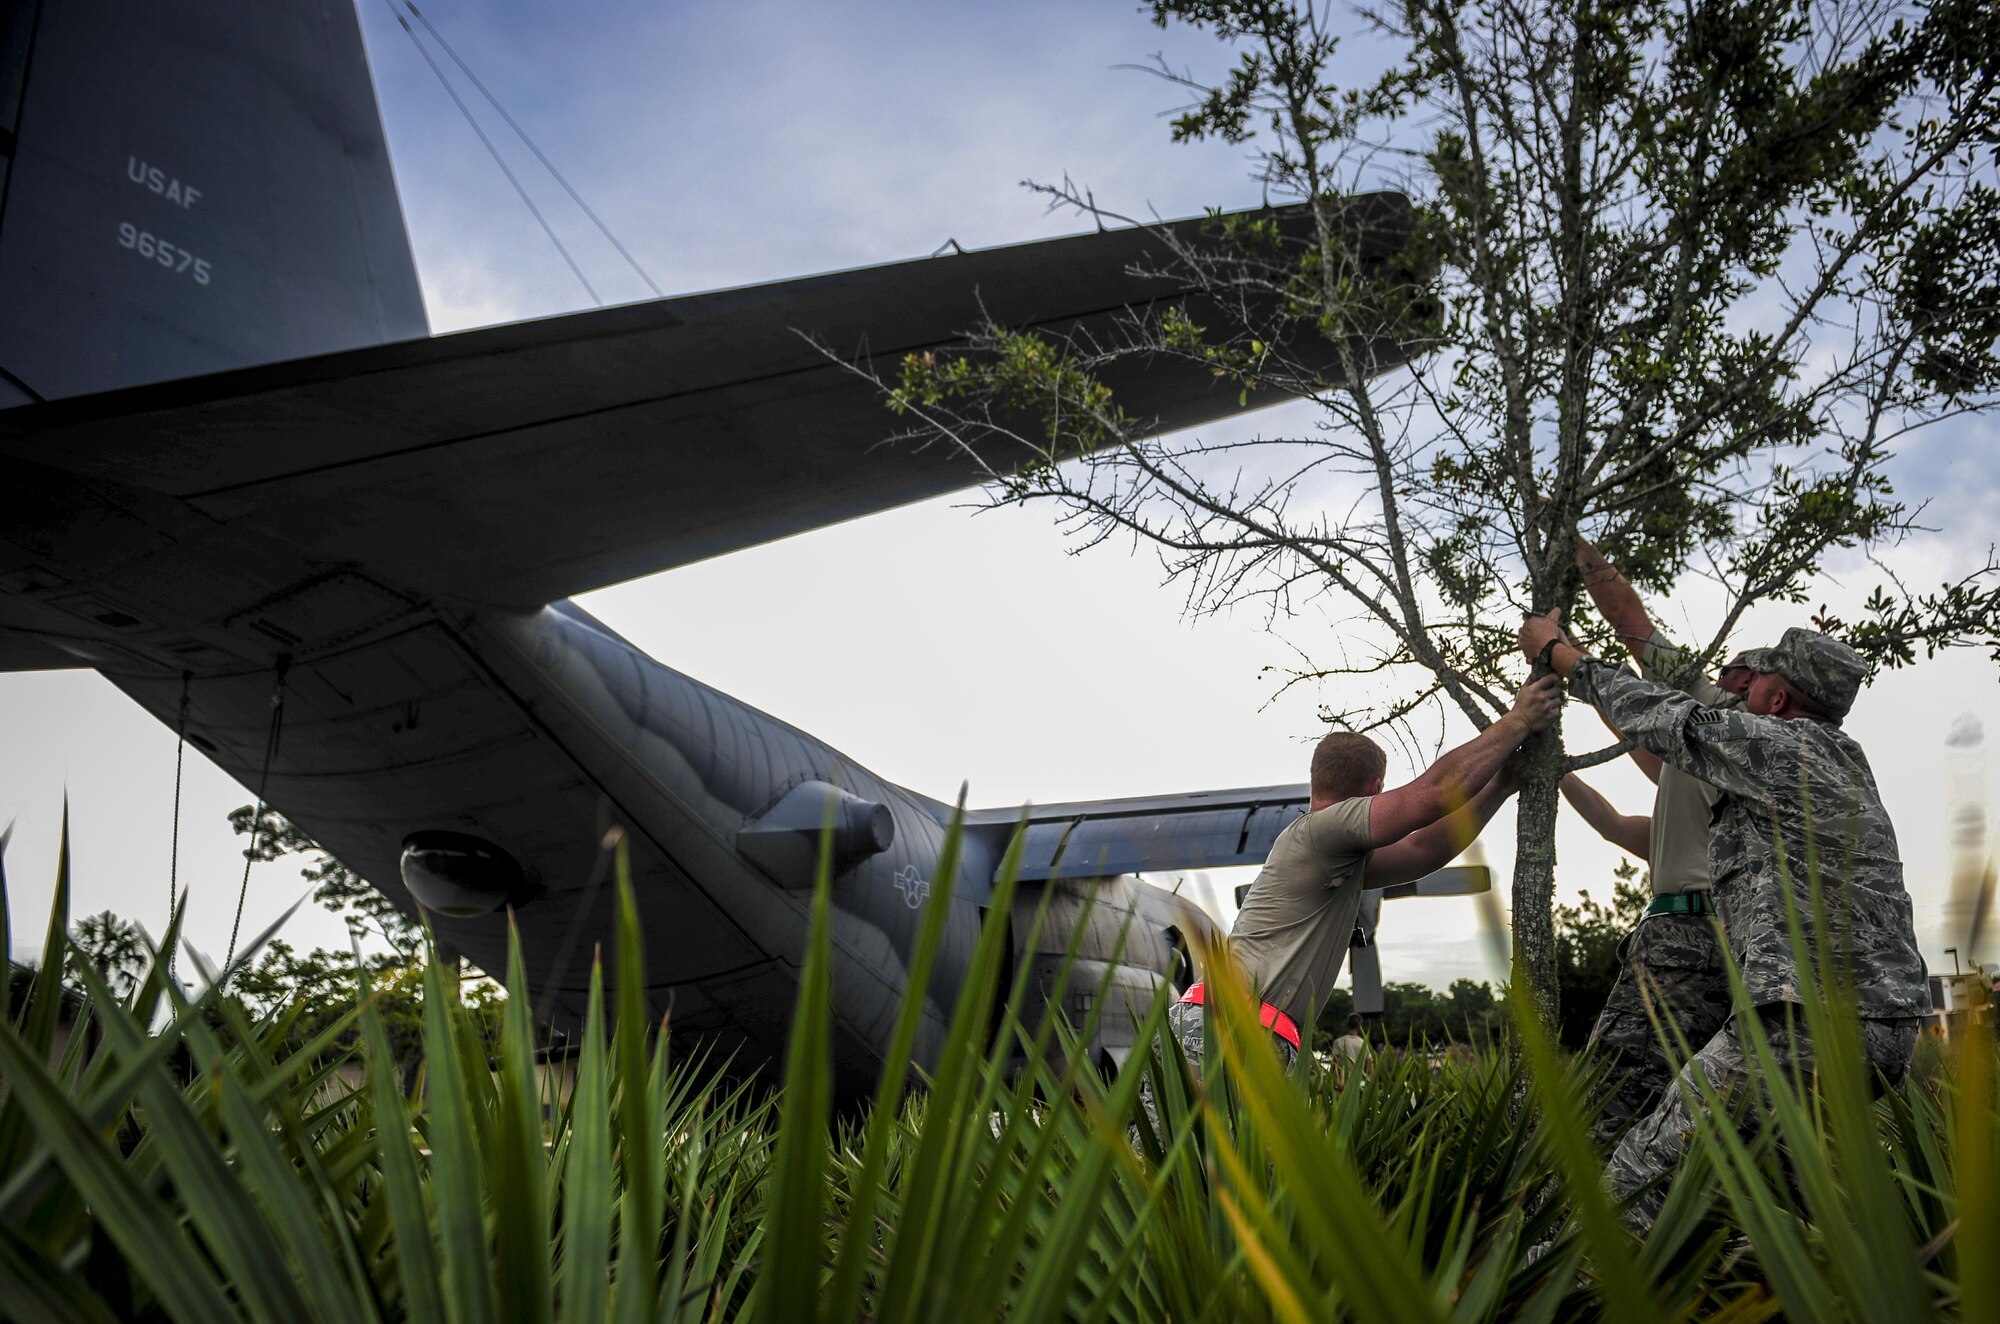 Airmen with the 1st Special Operations Aircraft Maintenance Squadron move a tree to avoid contact with the tail of an AC-130H Spectre on Hurlburt Field, Fla., Aug. 15, 2015. More than 40 personnel with eight base organizations were on site during the tow process. The AC-130H Spectre will be displayed at the North end of the Air Park. (U.S. Air Force photo by Senior Airman Meagan Schutter/Released)